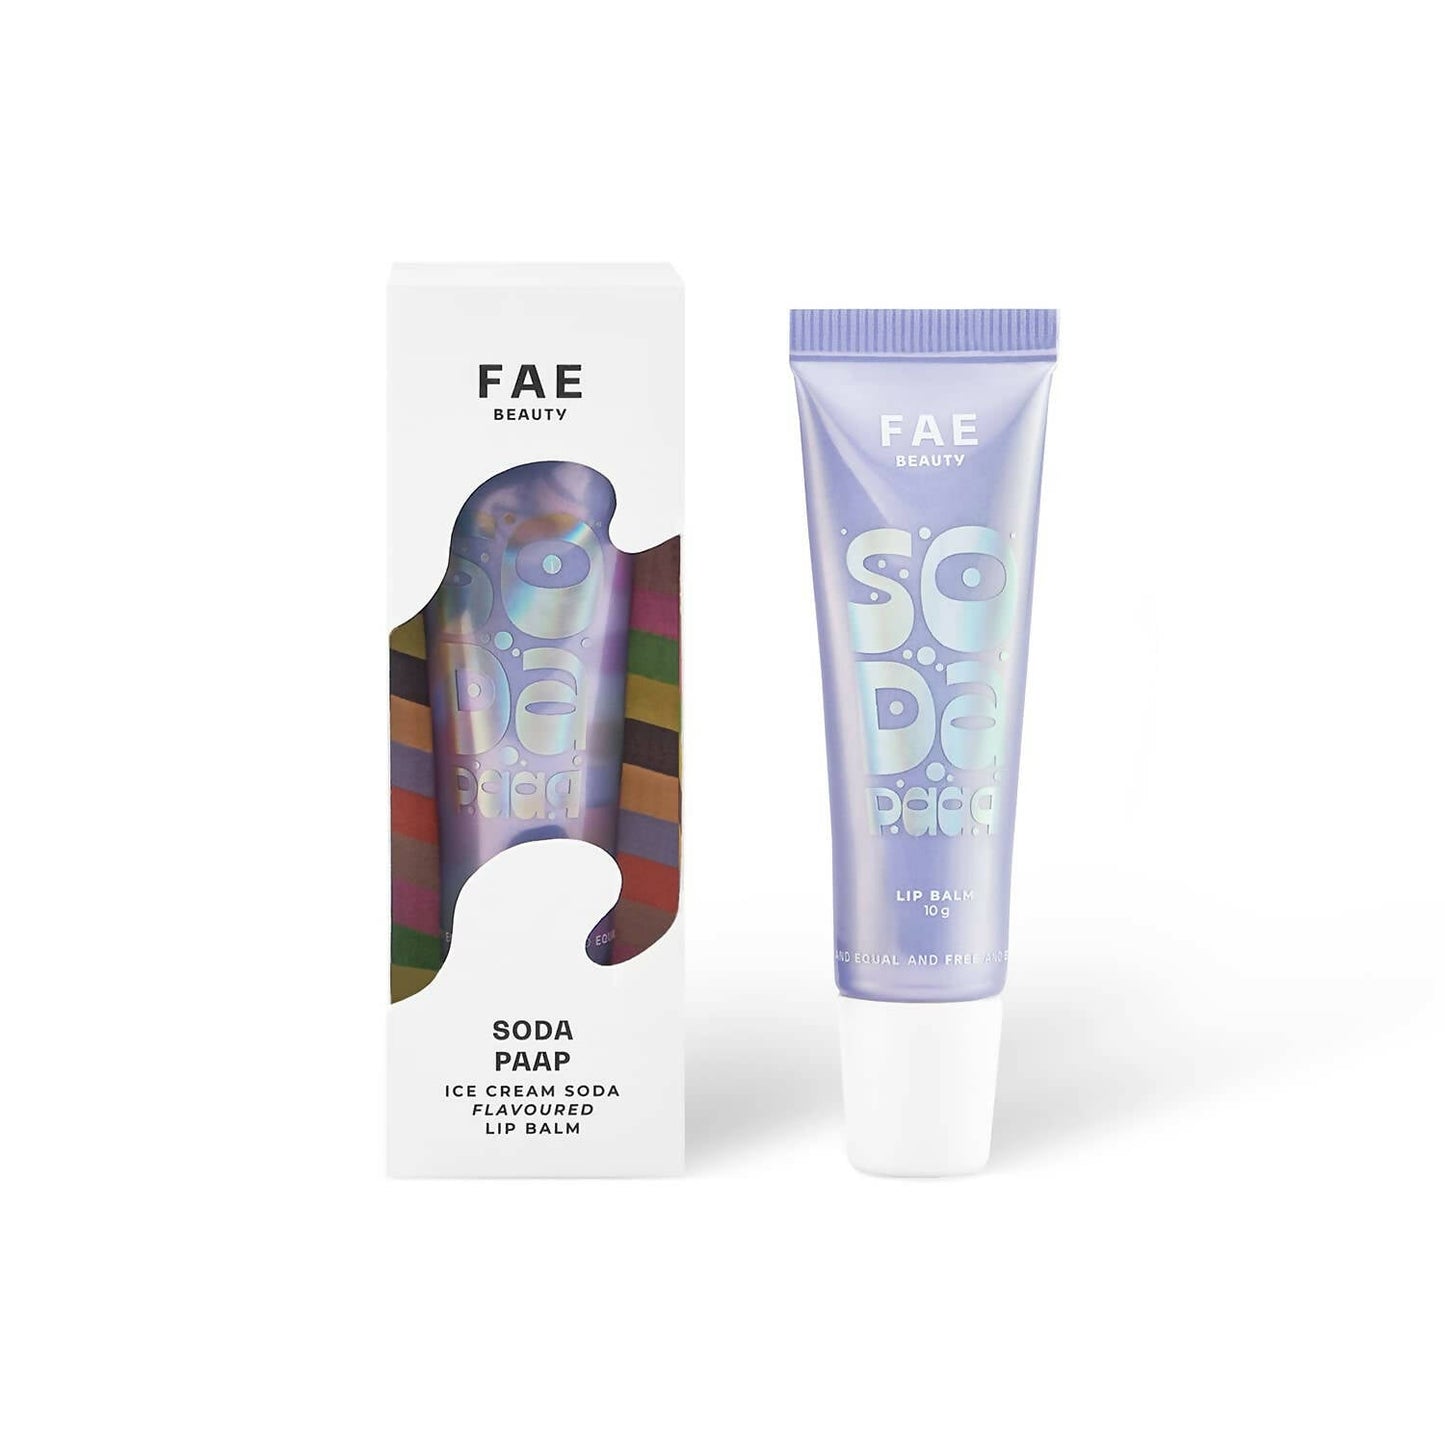 FAE Beauty Soda Paap Ice Cream Soda Lip Balm SPF 20+ - Untinted with Subtle Shimmer - BUDNEN